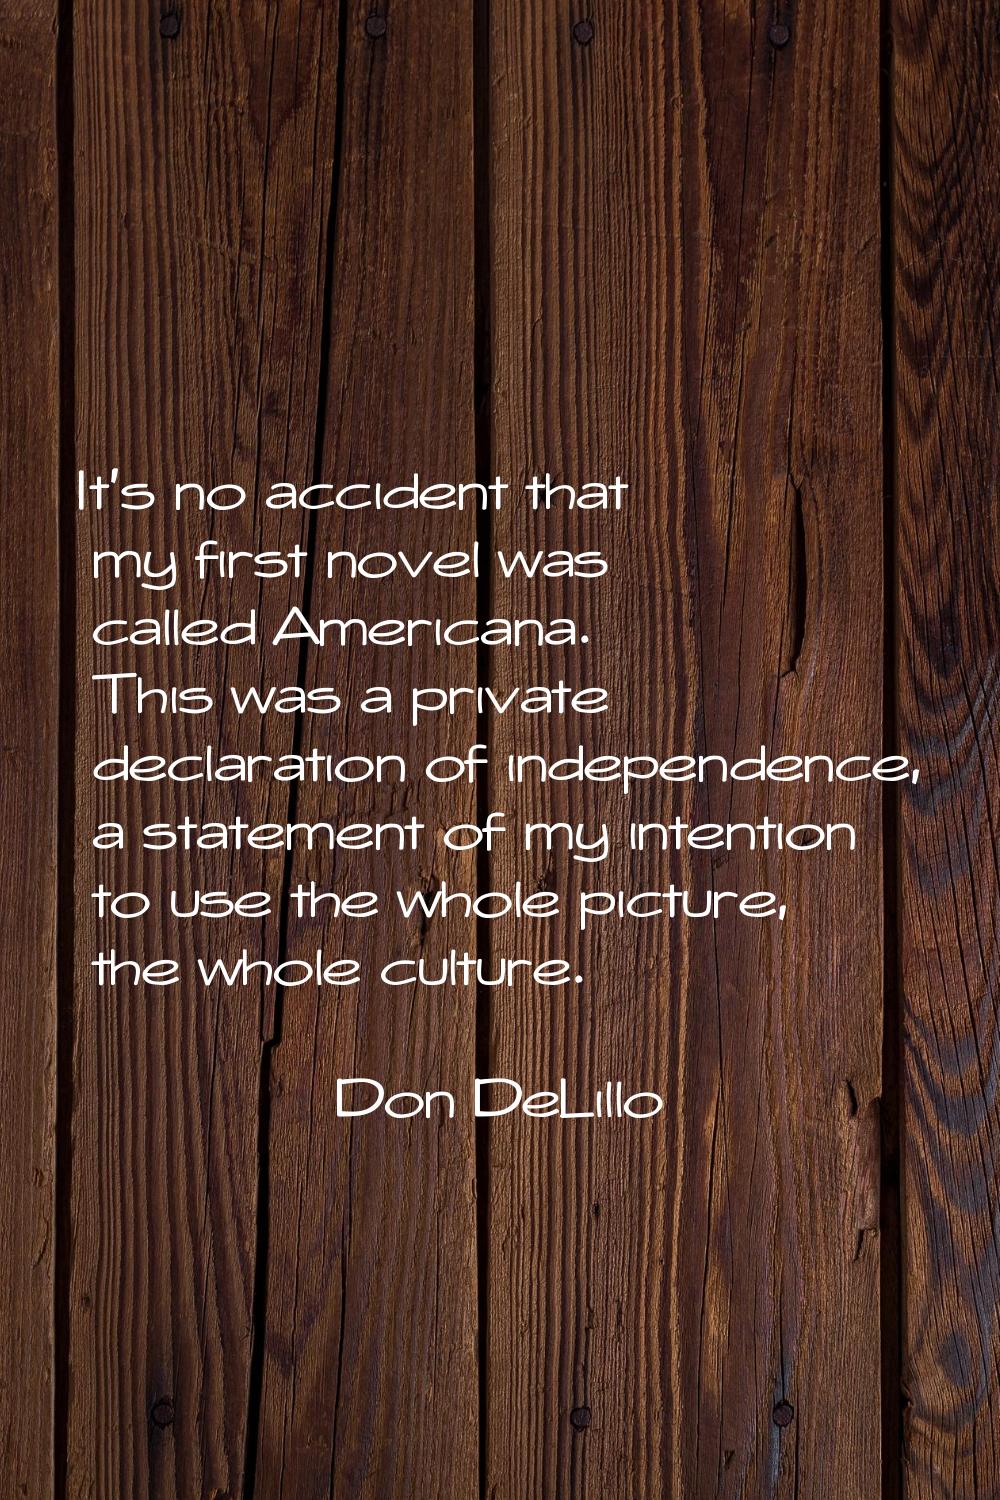 It's no accident that my first novel was called Americana. This was a private declaration of indepe